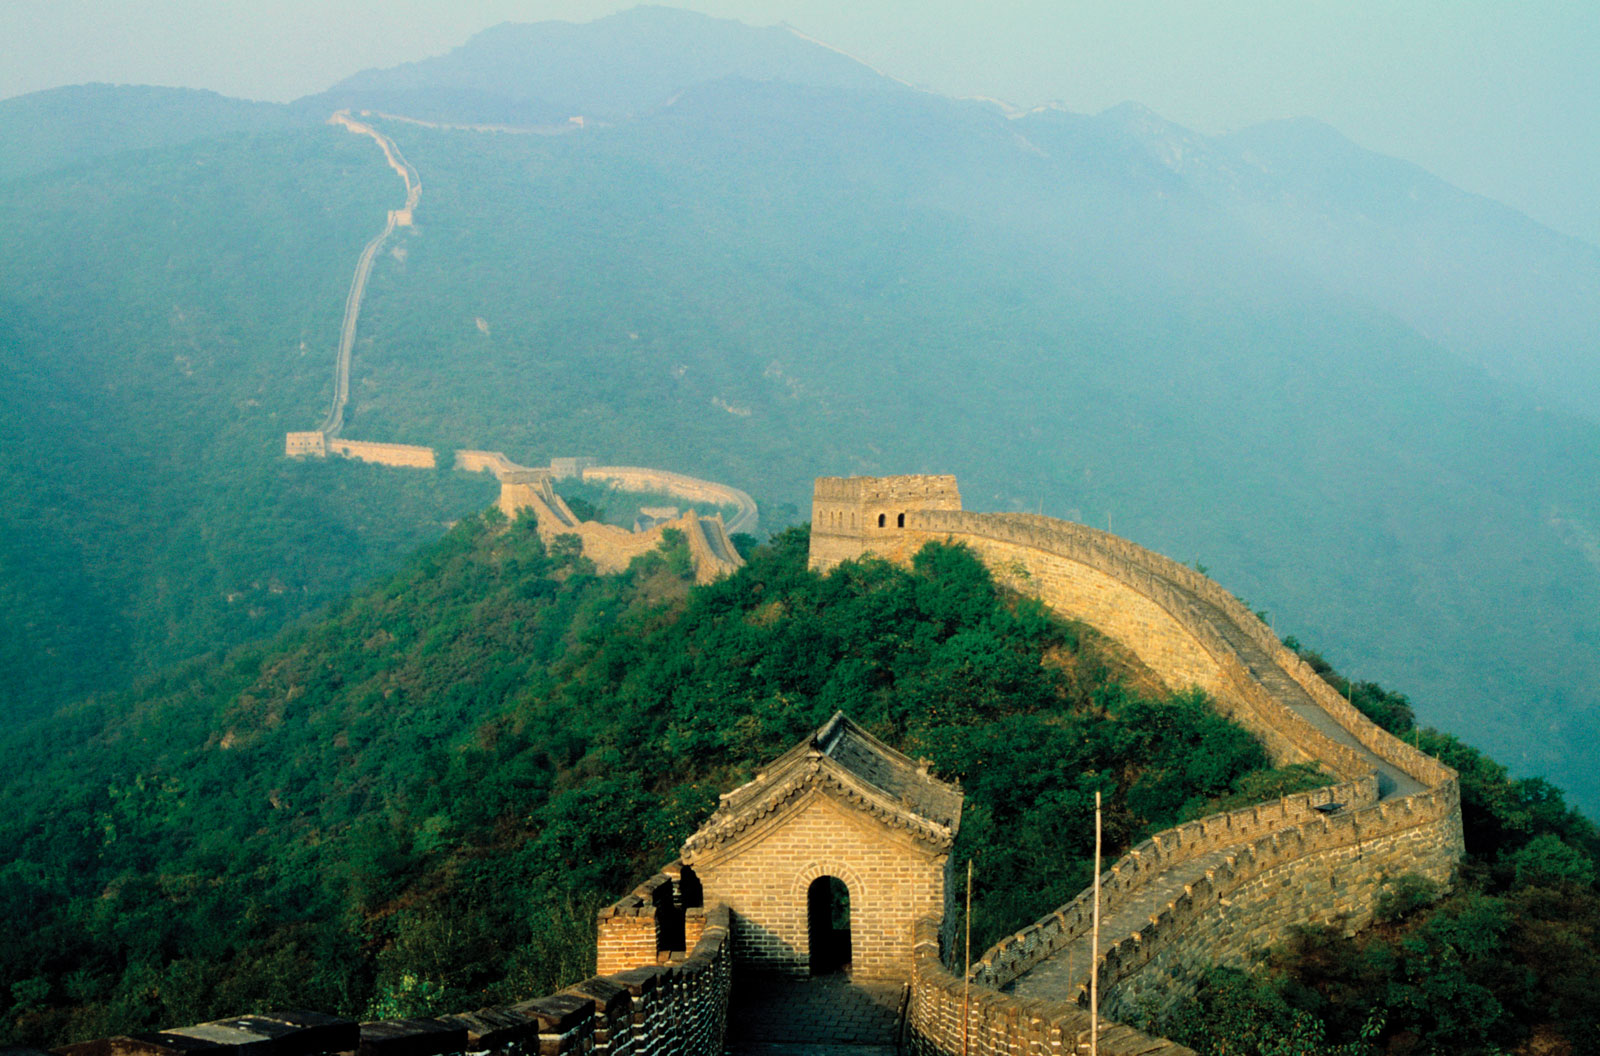 The Great Wall Of China, China – Heritage site since 1987